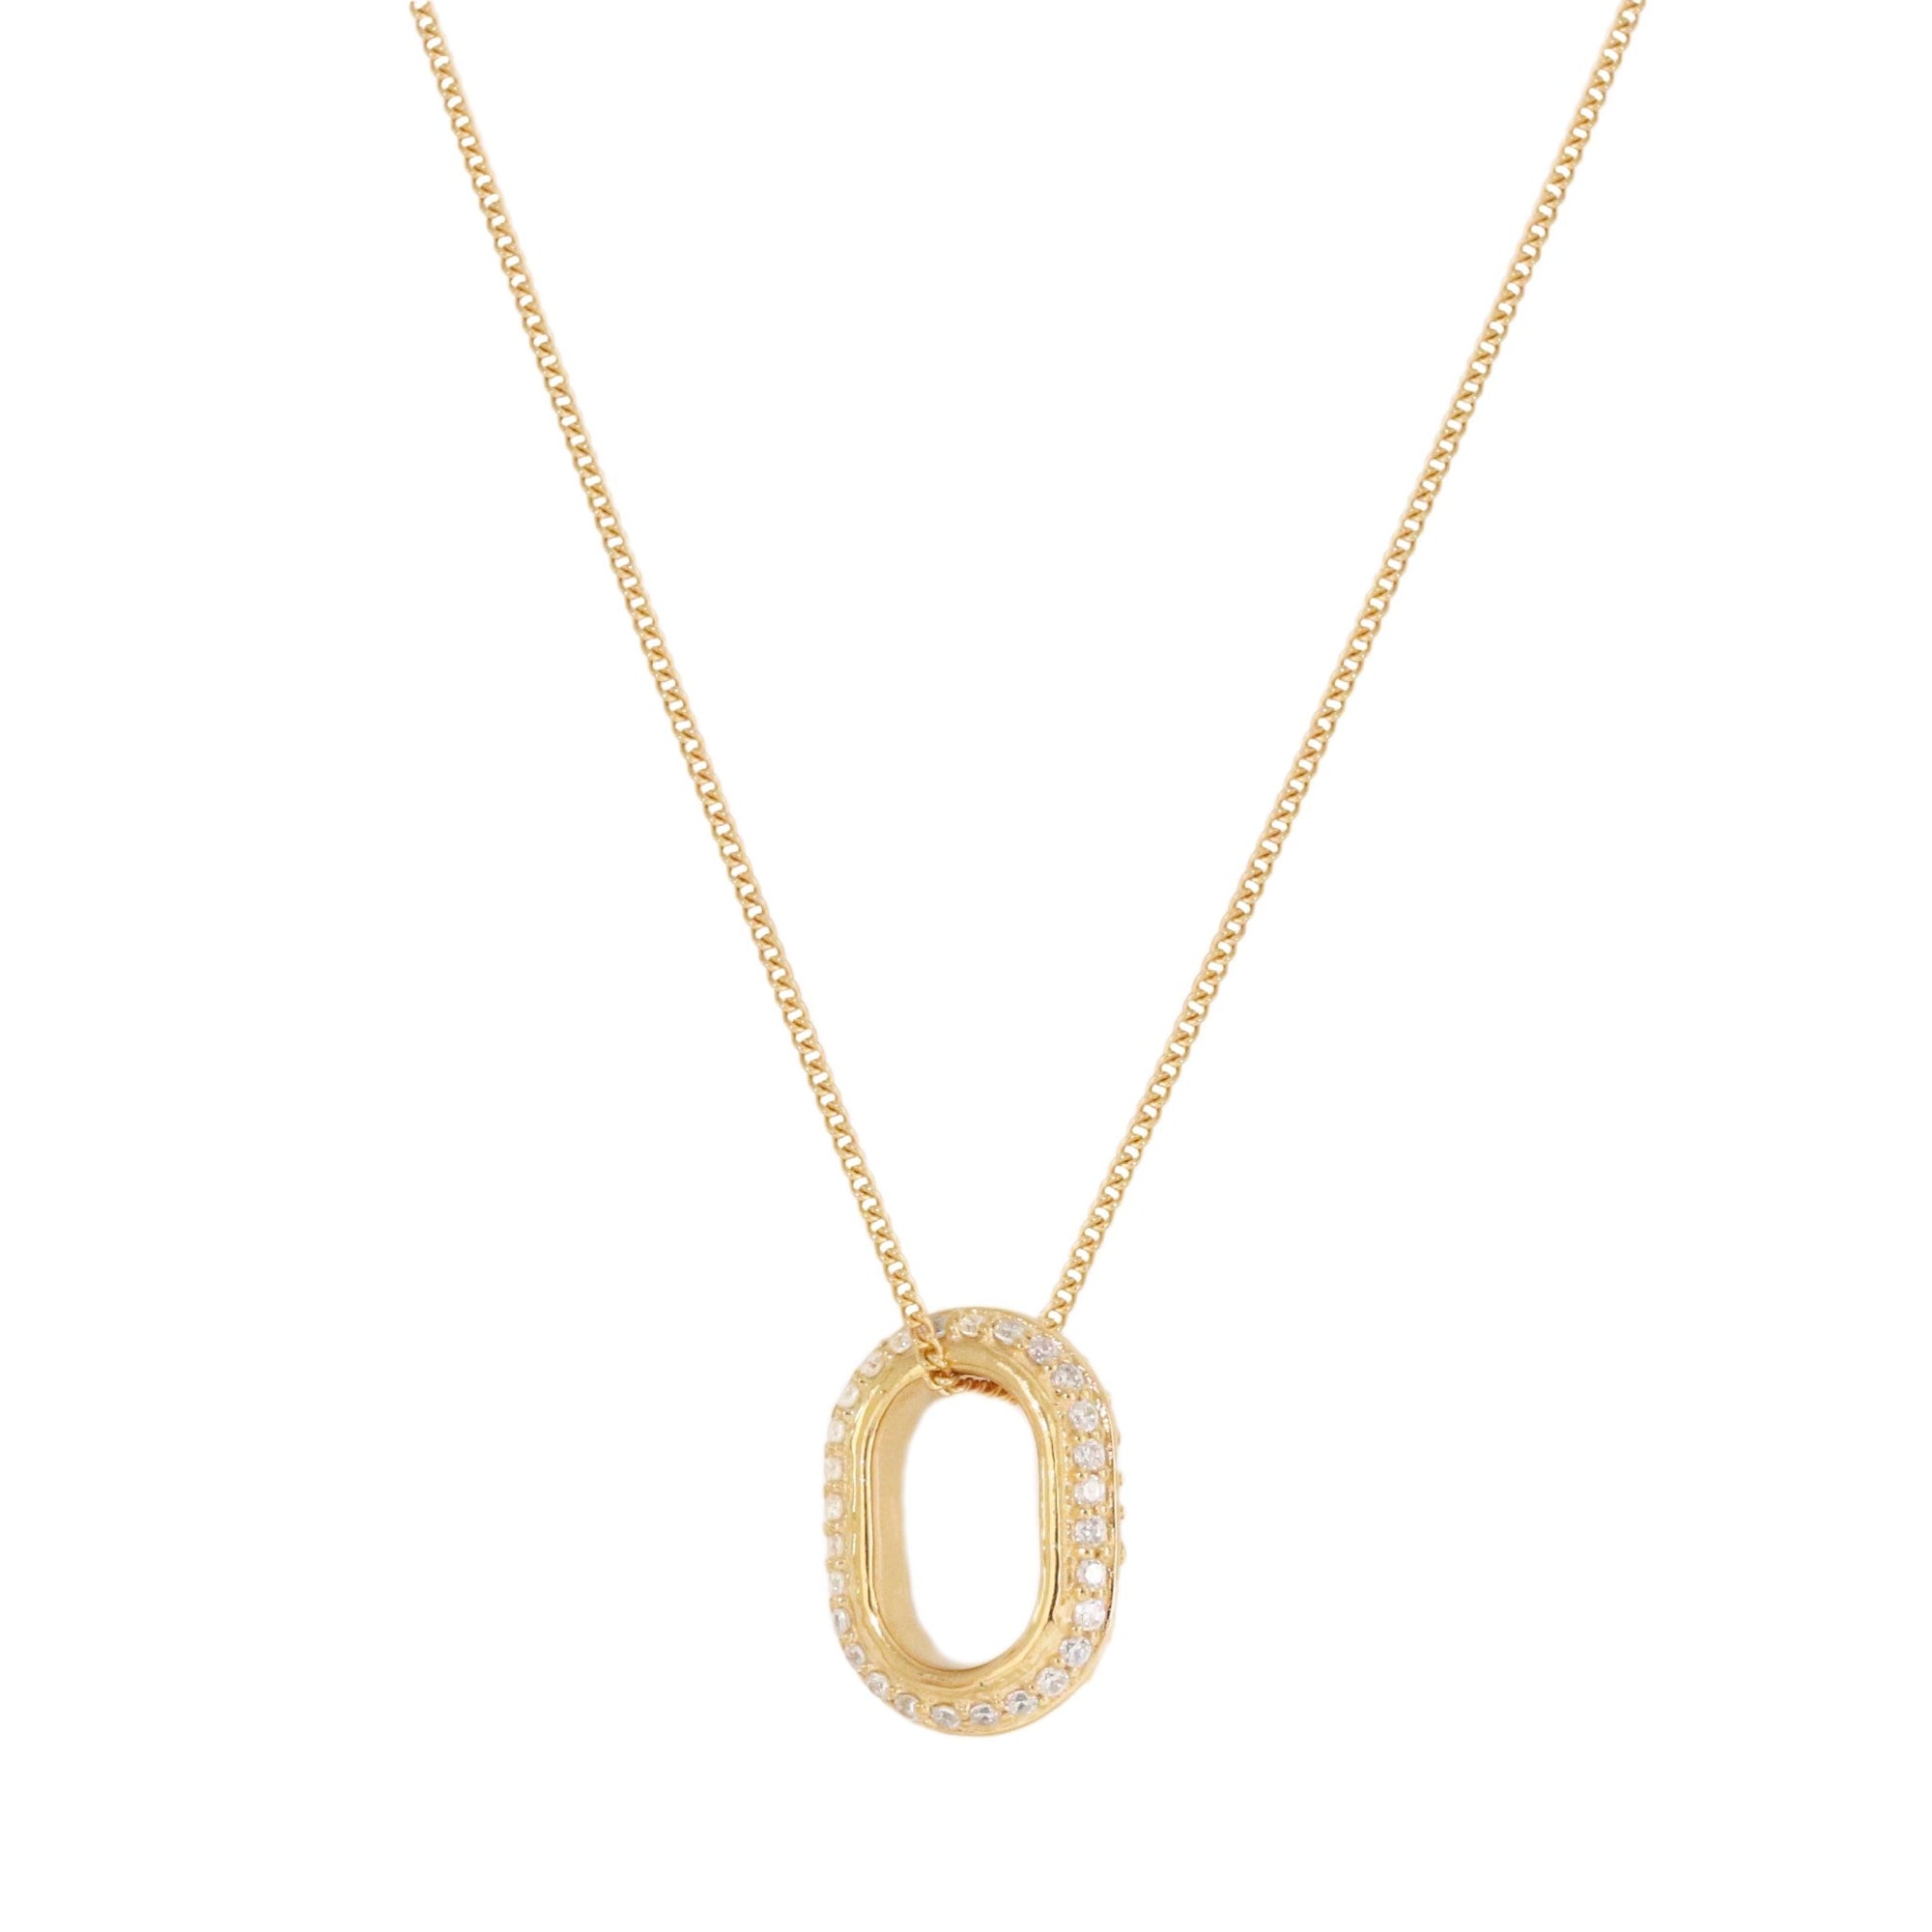 LOVE ETERNITY OVAL PENDANT NECKLACE - CUBIC ZIRCONIA & GOLD - SO PRETTY CARA COTTER